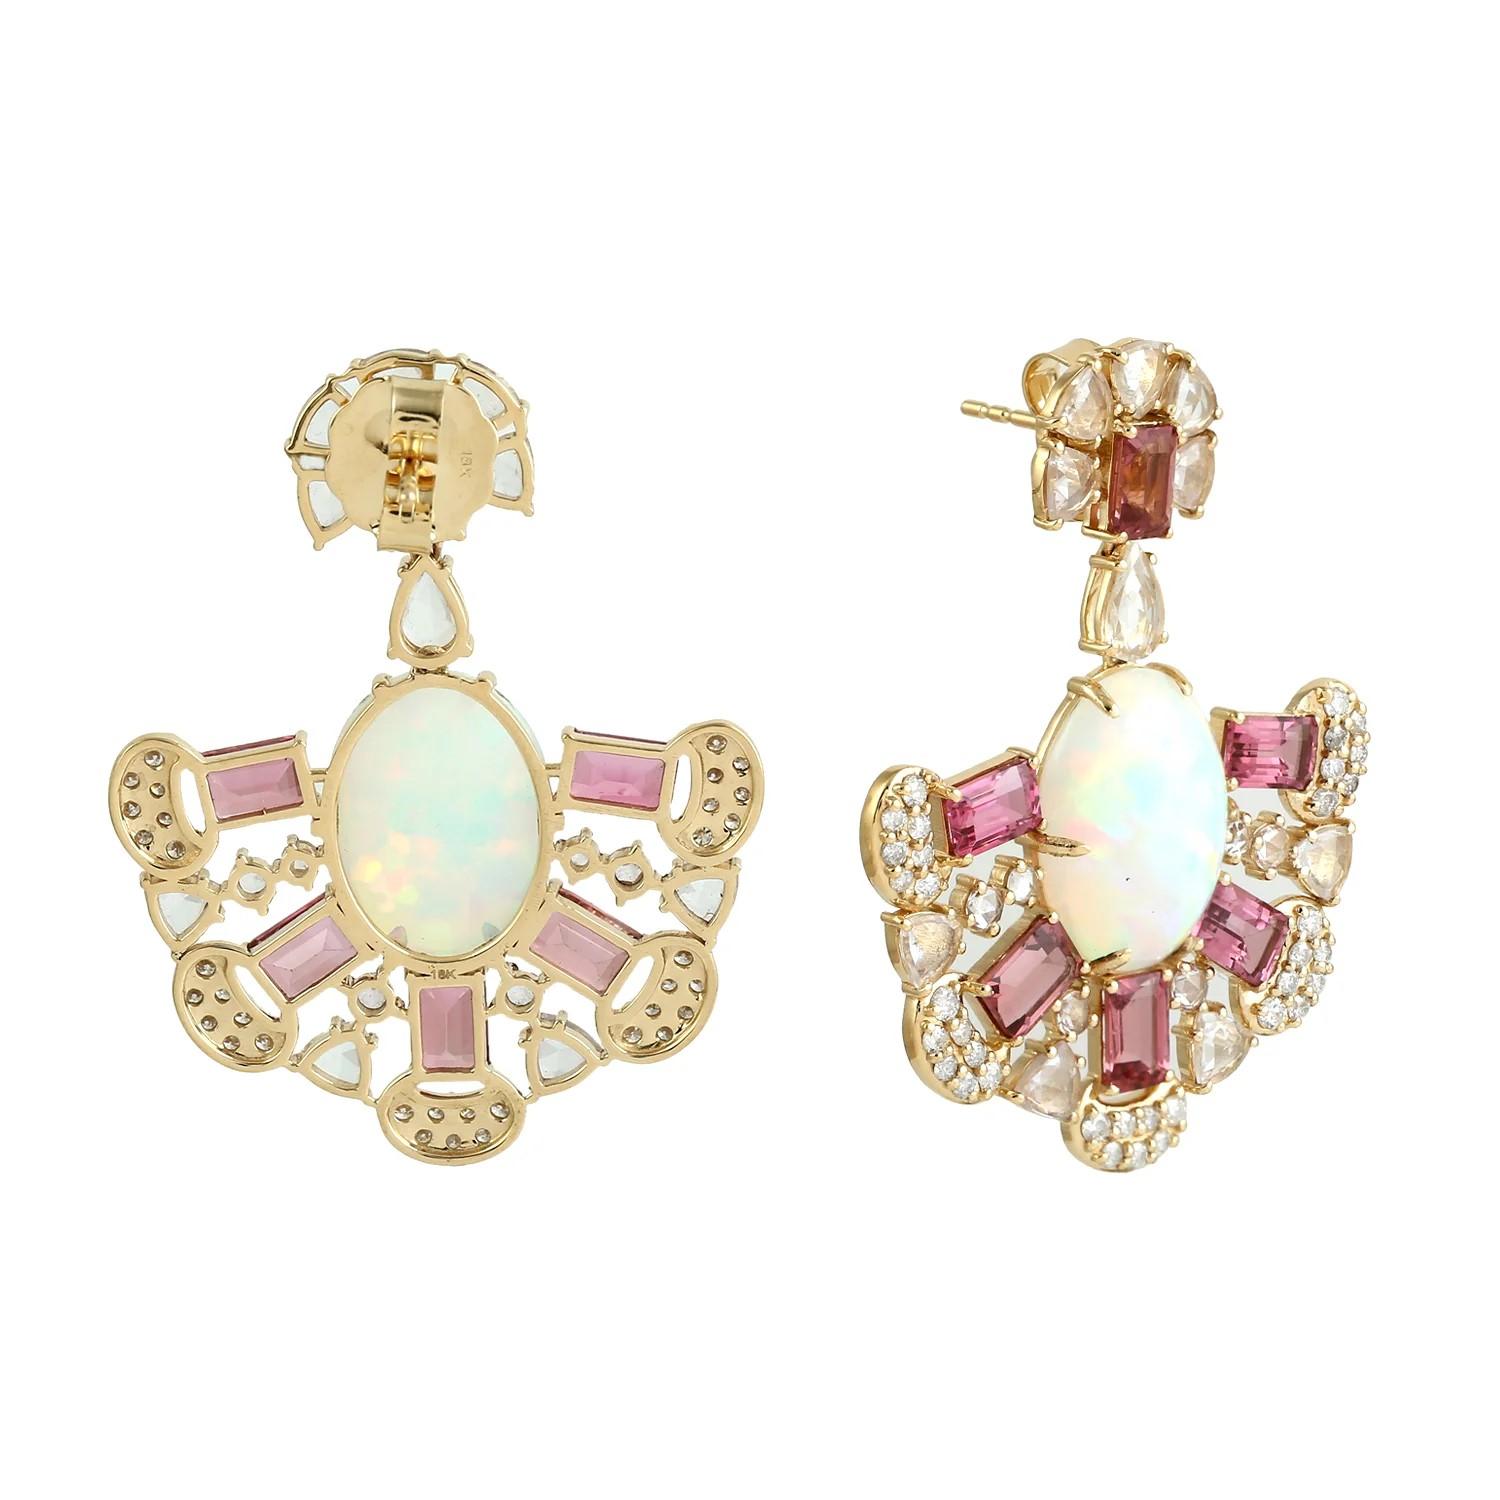 Cast in 14 karat gold. These stud earrings are hand set in 9.41 carats Ethiopian opal, sapphire and 1.21 carats of sparkling diamonds. 

FOLLOW MEGHNA JEWELS storefront to view the latest collection & exclusive pieces. Meghna Jewels is proudly rated